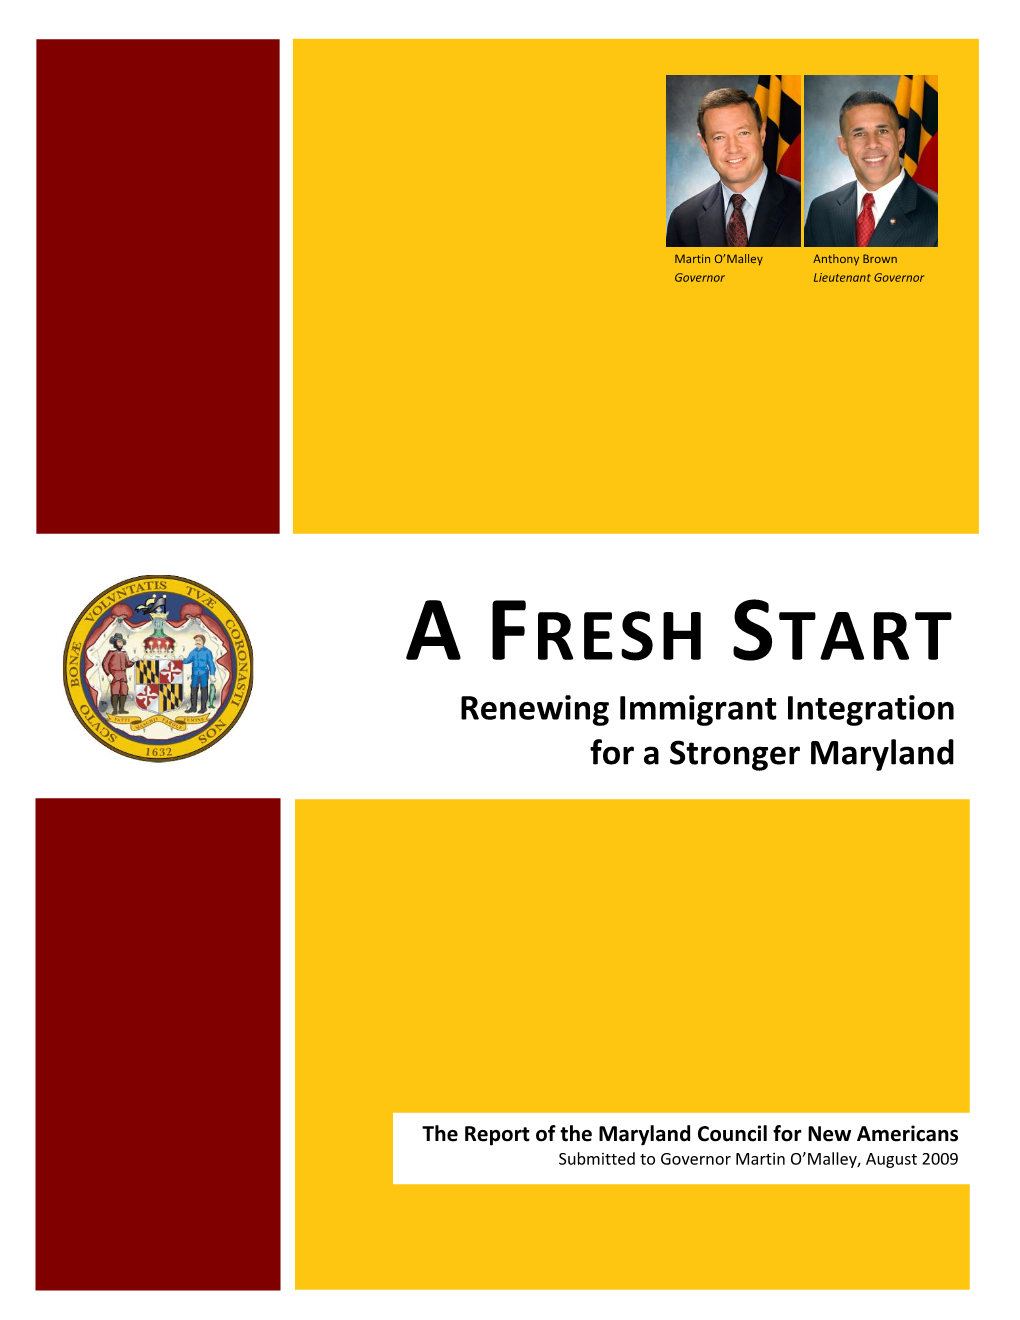 A FRESH START: Renewing Immigrant Integration for a Stronger Maryland